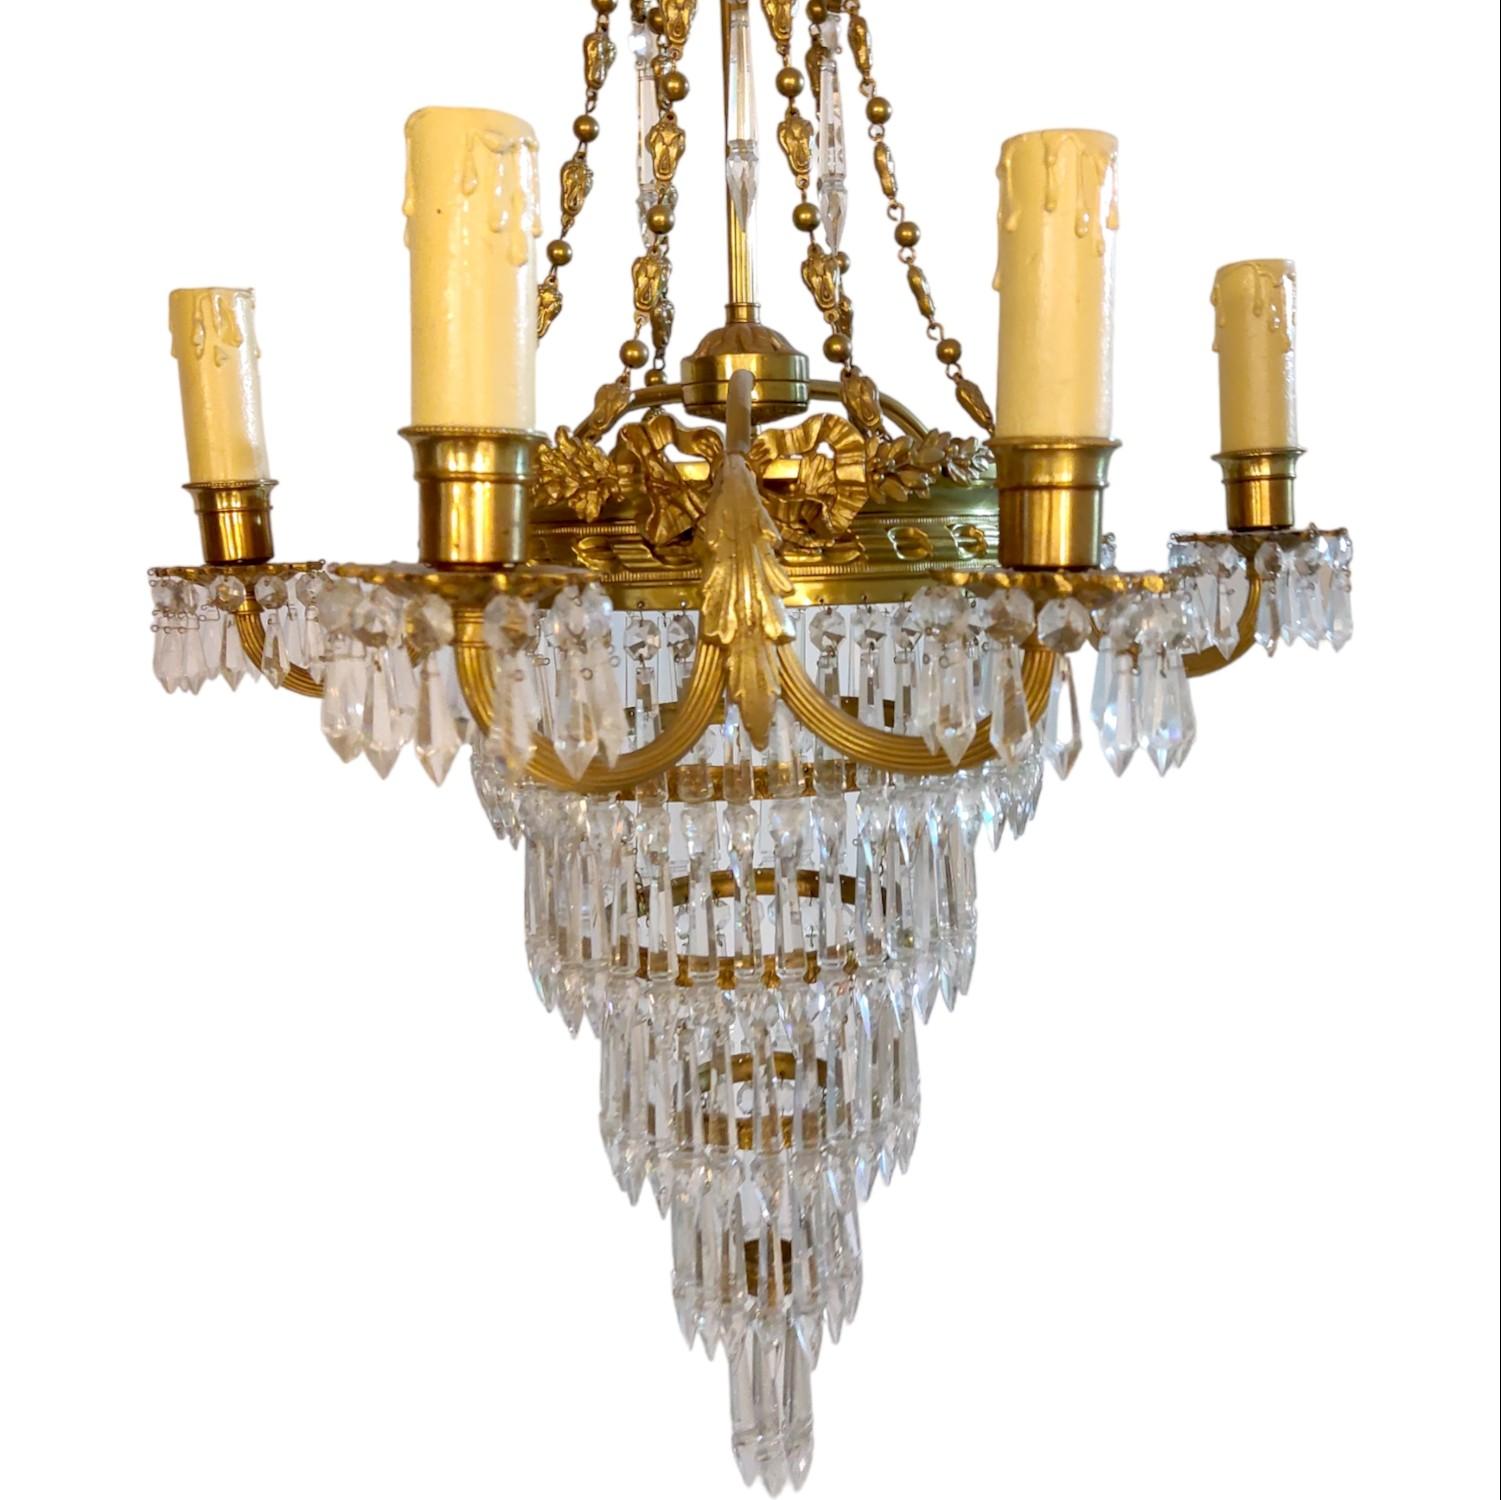 20th Century French Empire Style Crystal Glass and Brass Five-Tired Chandelier, 1930s